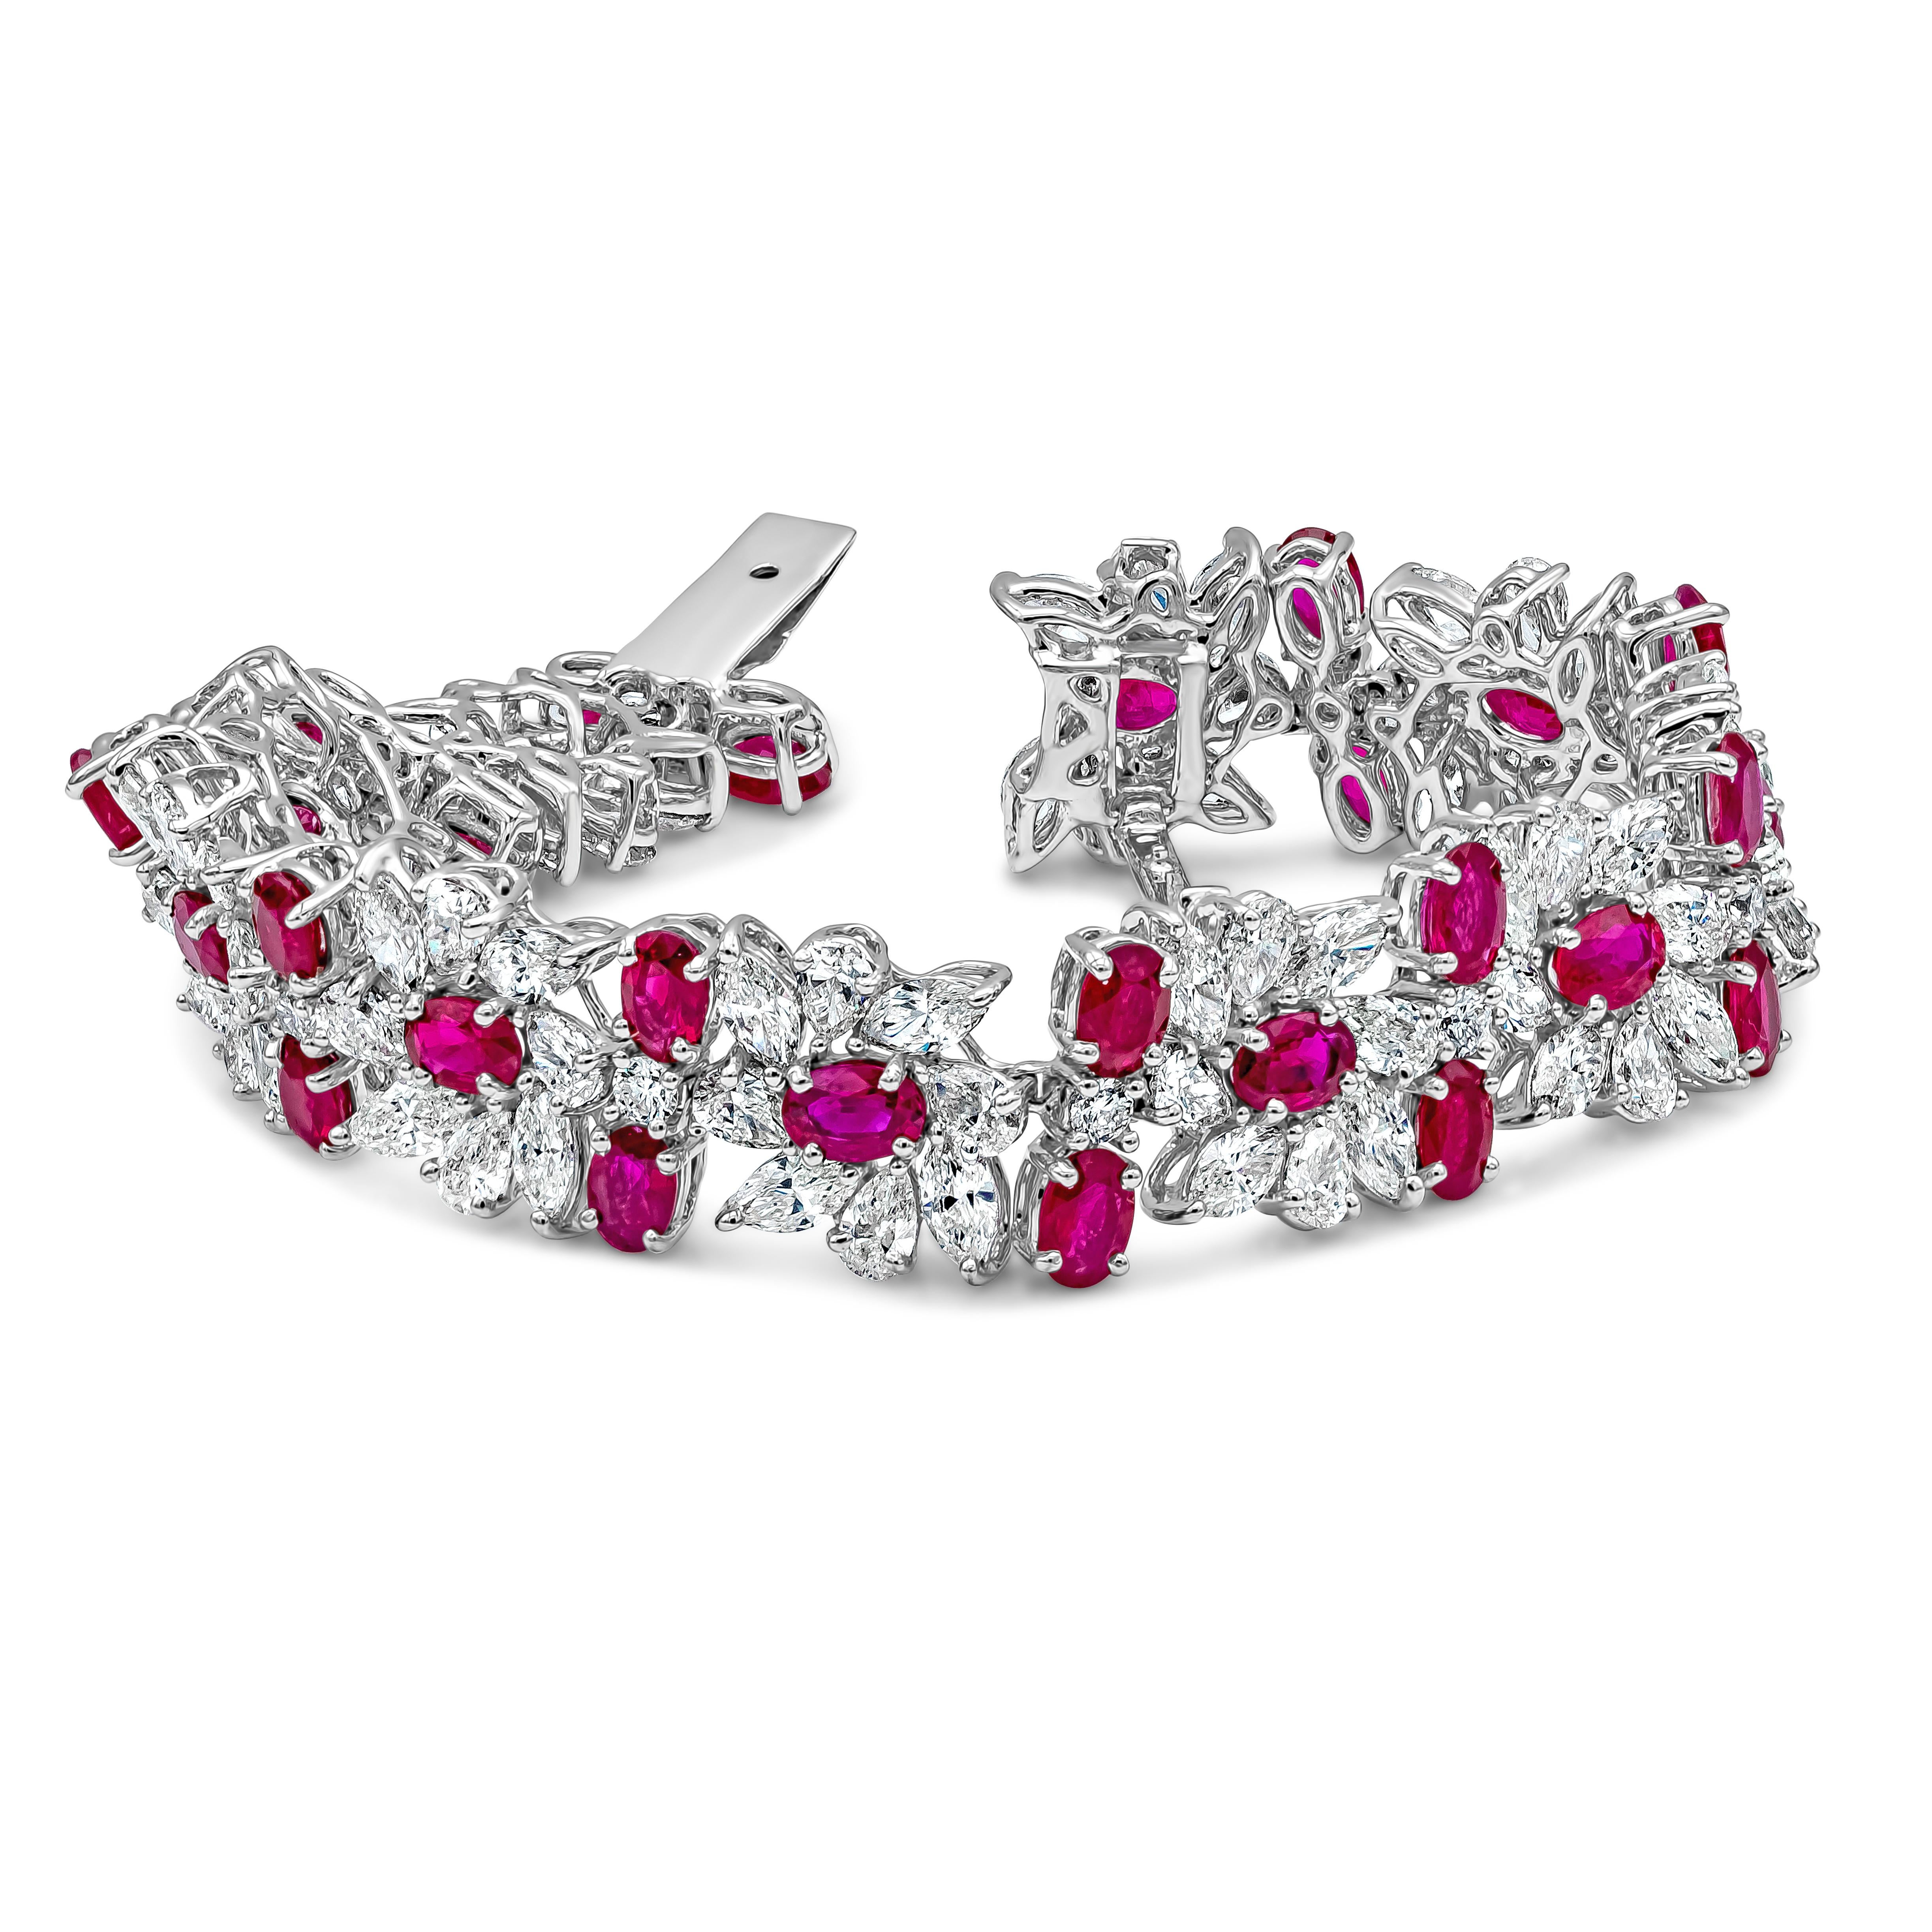 A beautiful delicate, labor intensive cluster bracelet showcasing 38.21 carats total of mix-cut diamonds and rubies. 30 oval cut rubies weighing 17.80 carats, surrounded by marquis cut diamonds weighing 19.27 carats set in a flower-motif design.